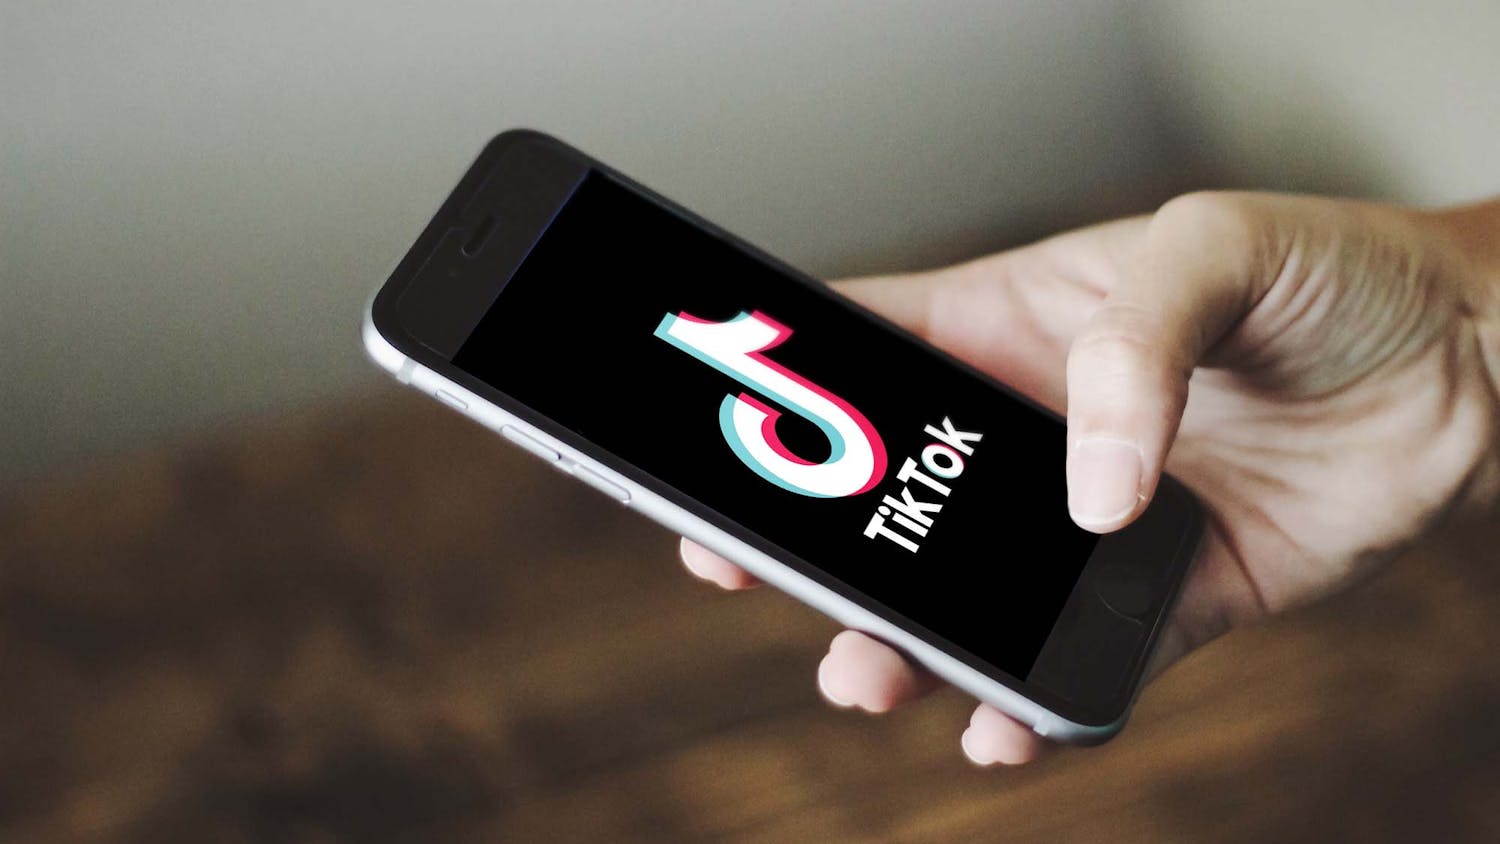 TikTok is one step closer to being banned in the United States, making small business owners and creators panic. (Photo courtesy of Flickr / Nordskov Media, September 1, 2021)